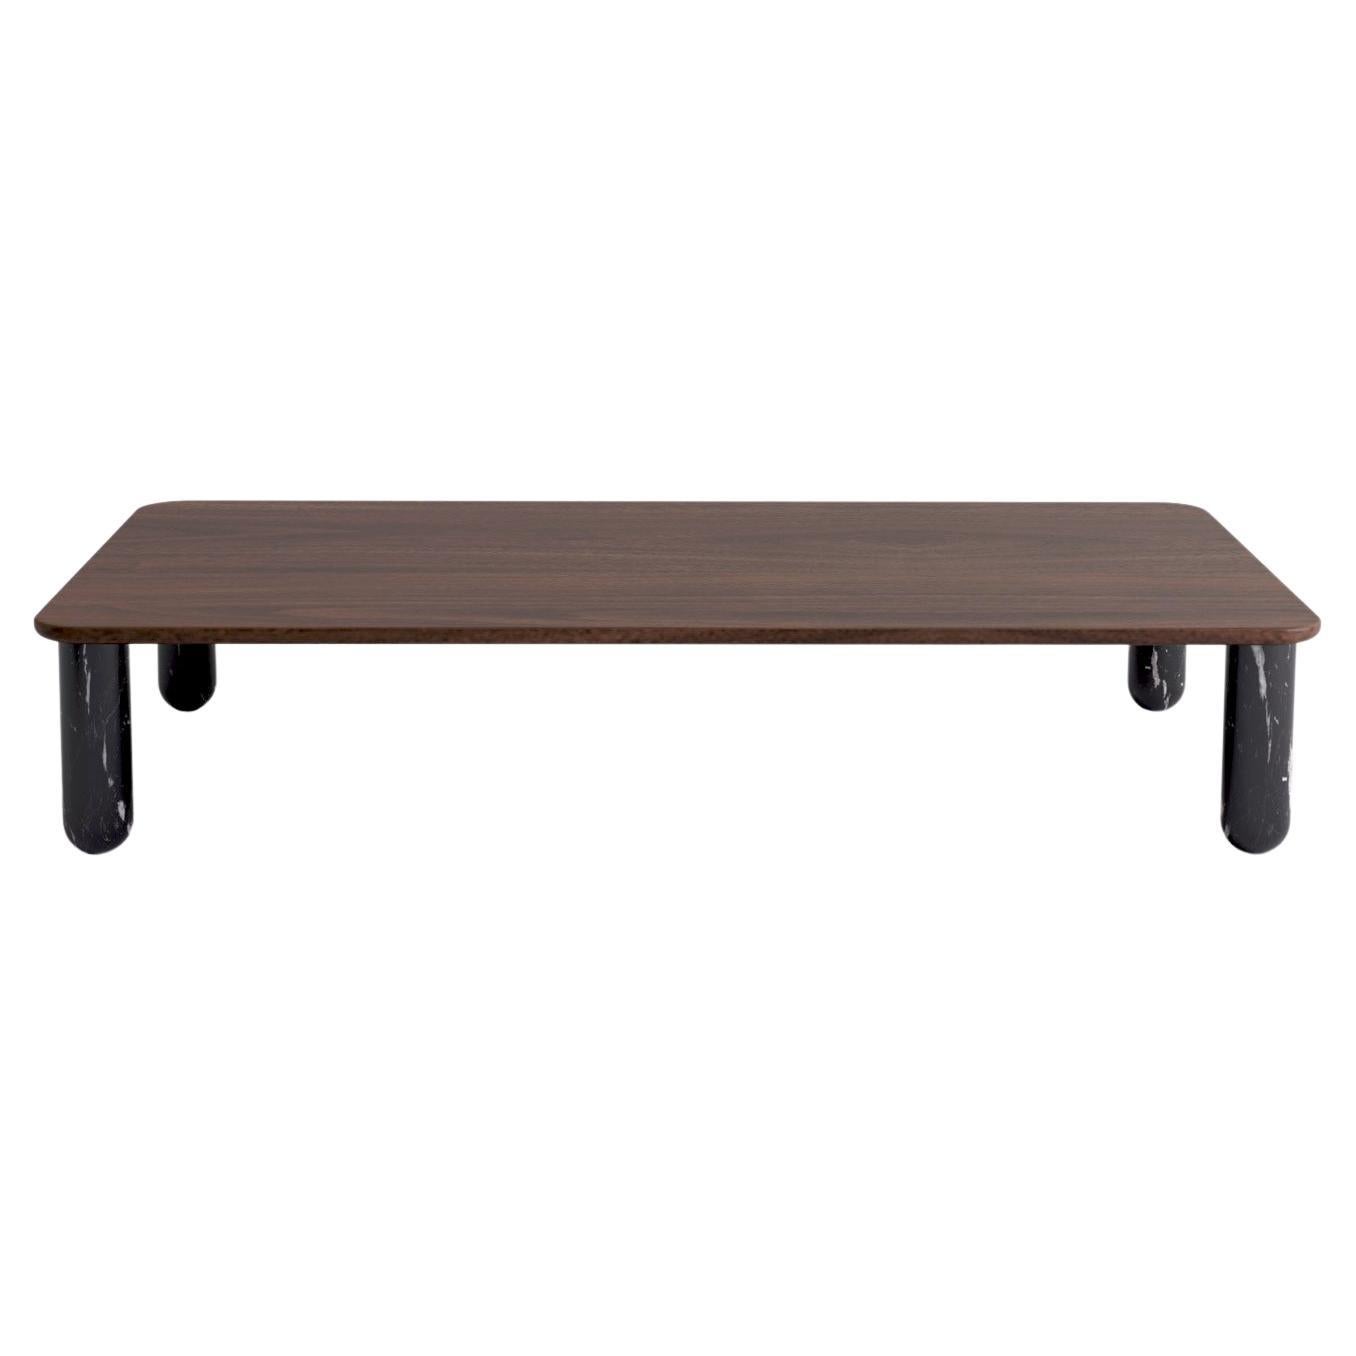 XLarge Walnut and Black Marble "Sunday" Coffee Table, Jean-Baptiste Souletie For Sale